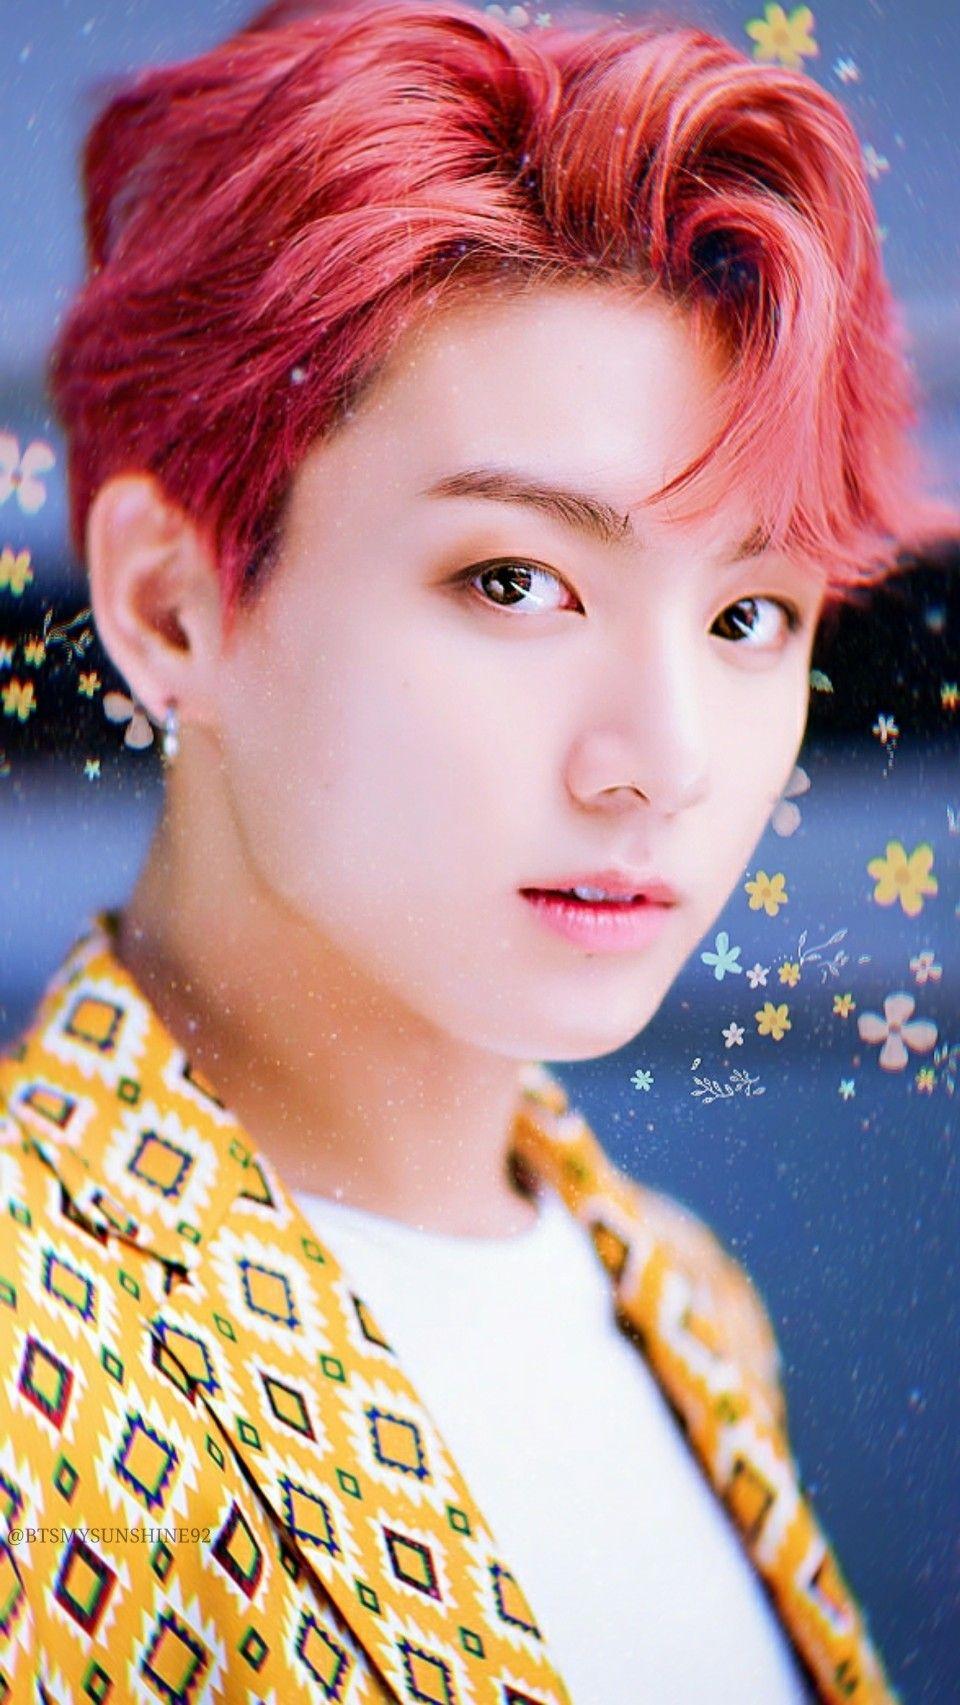 Have You Seen These Rare And Unseen Photoshoots Of BTS Jungkook Yet? 1